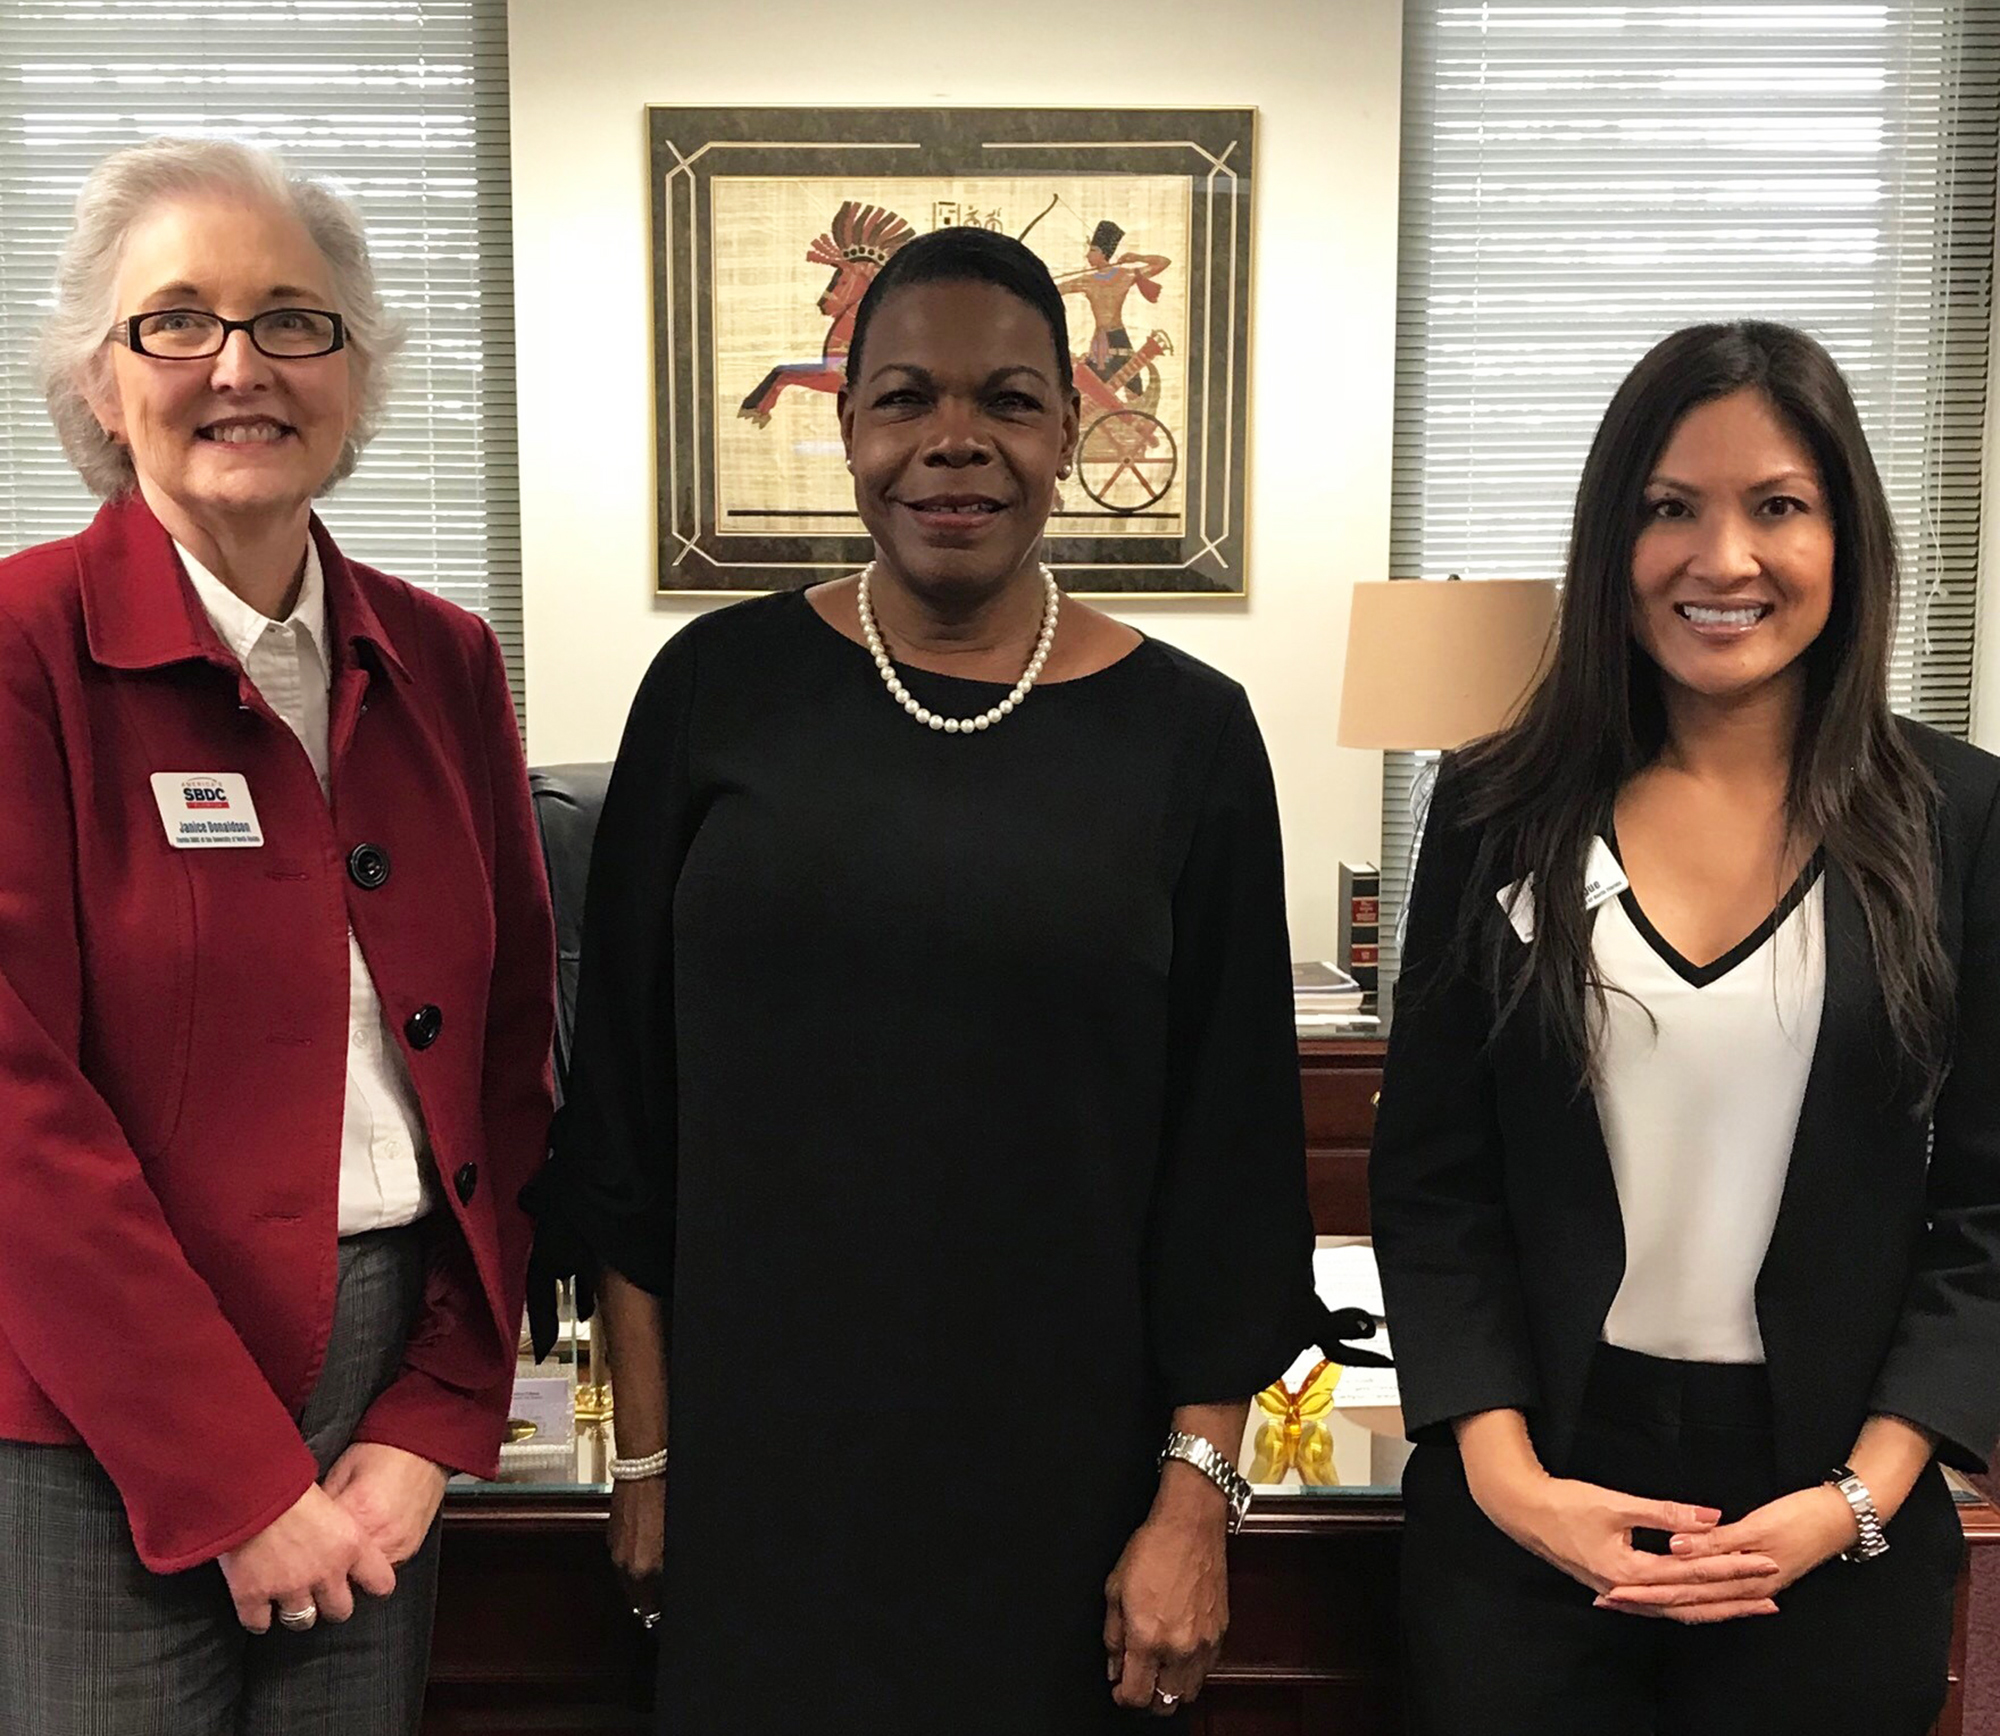 From left, Janice Donaldson, state Sen. Audrey Gibson; and UNF SBDC Marketing Director Marice Hague. Donaldson visits lawmakers in Tallahassee each year before the legislative session to lobby for their continued support.